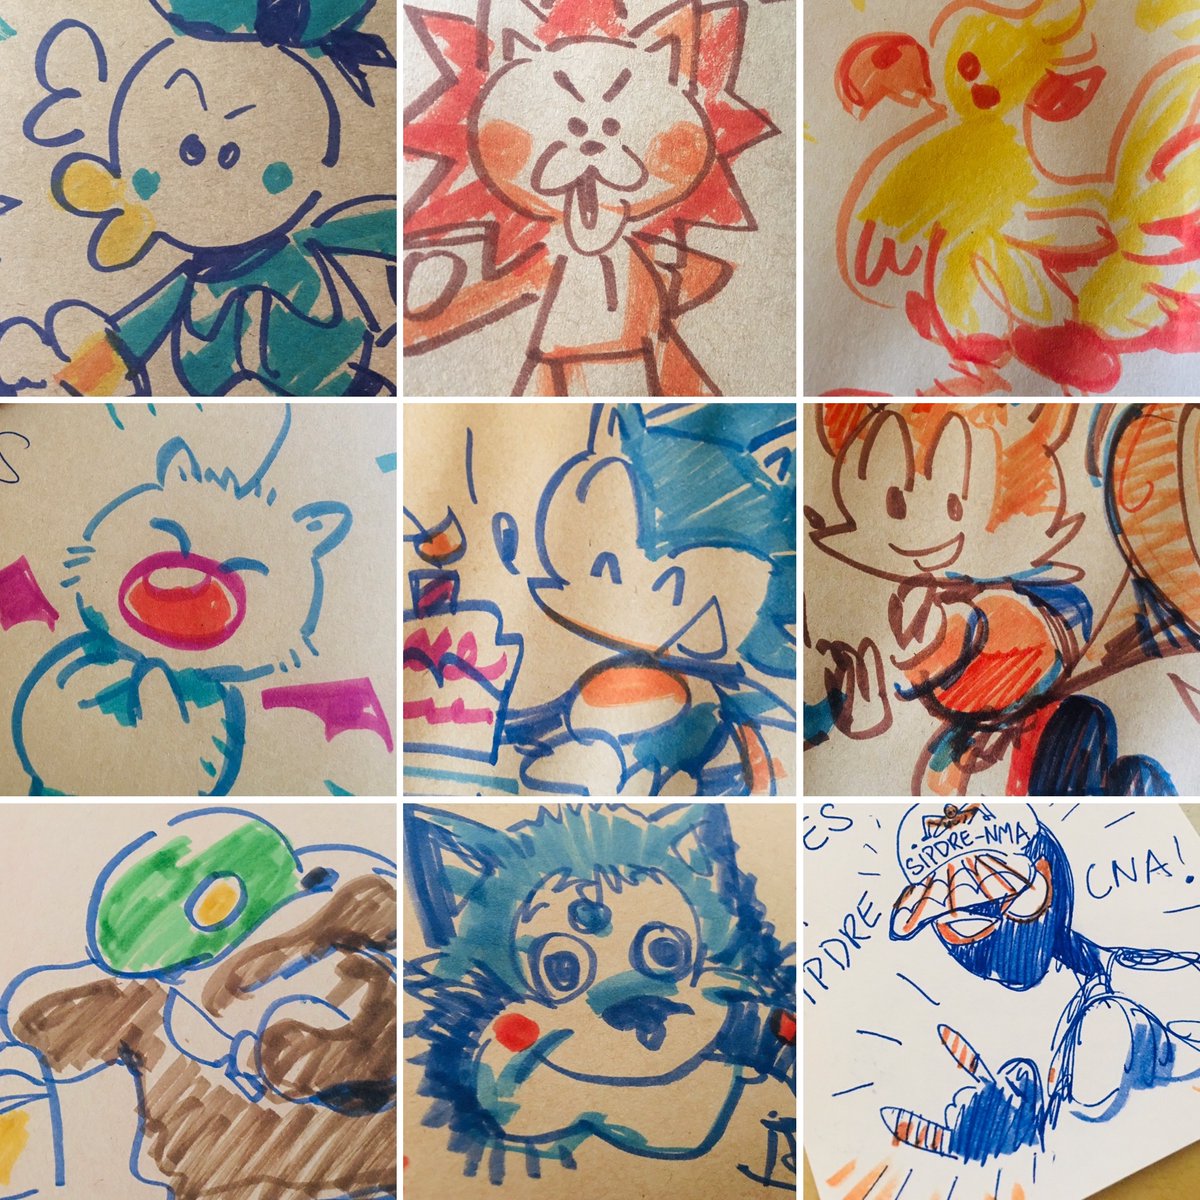 haven't added to the thread in a while, some more recent order doodles! 